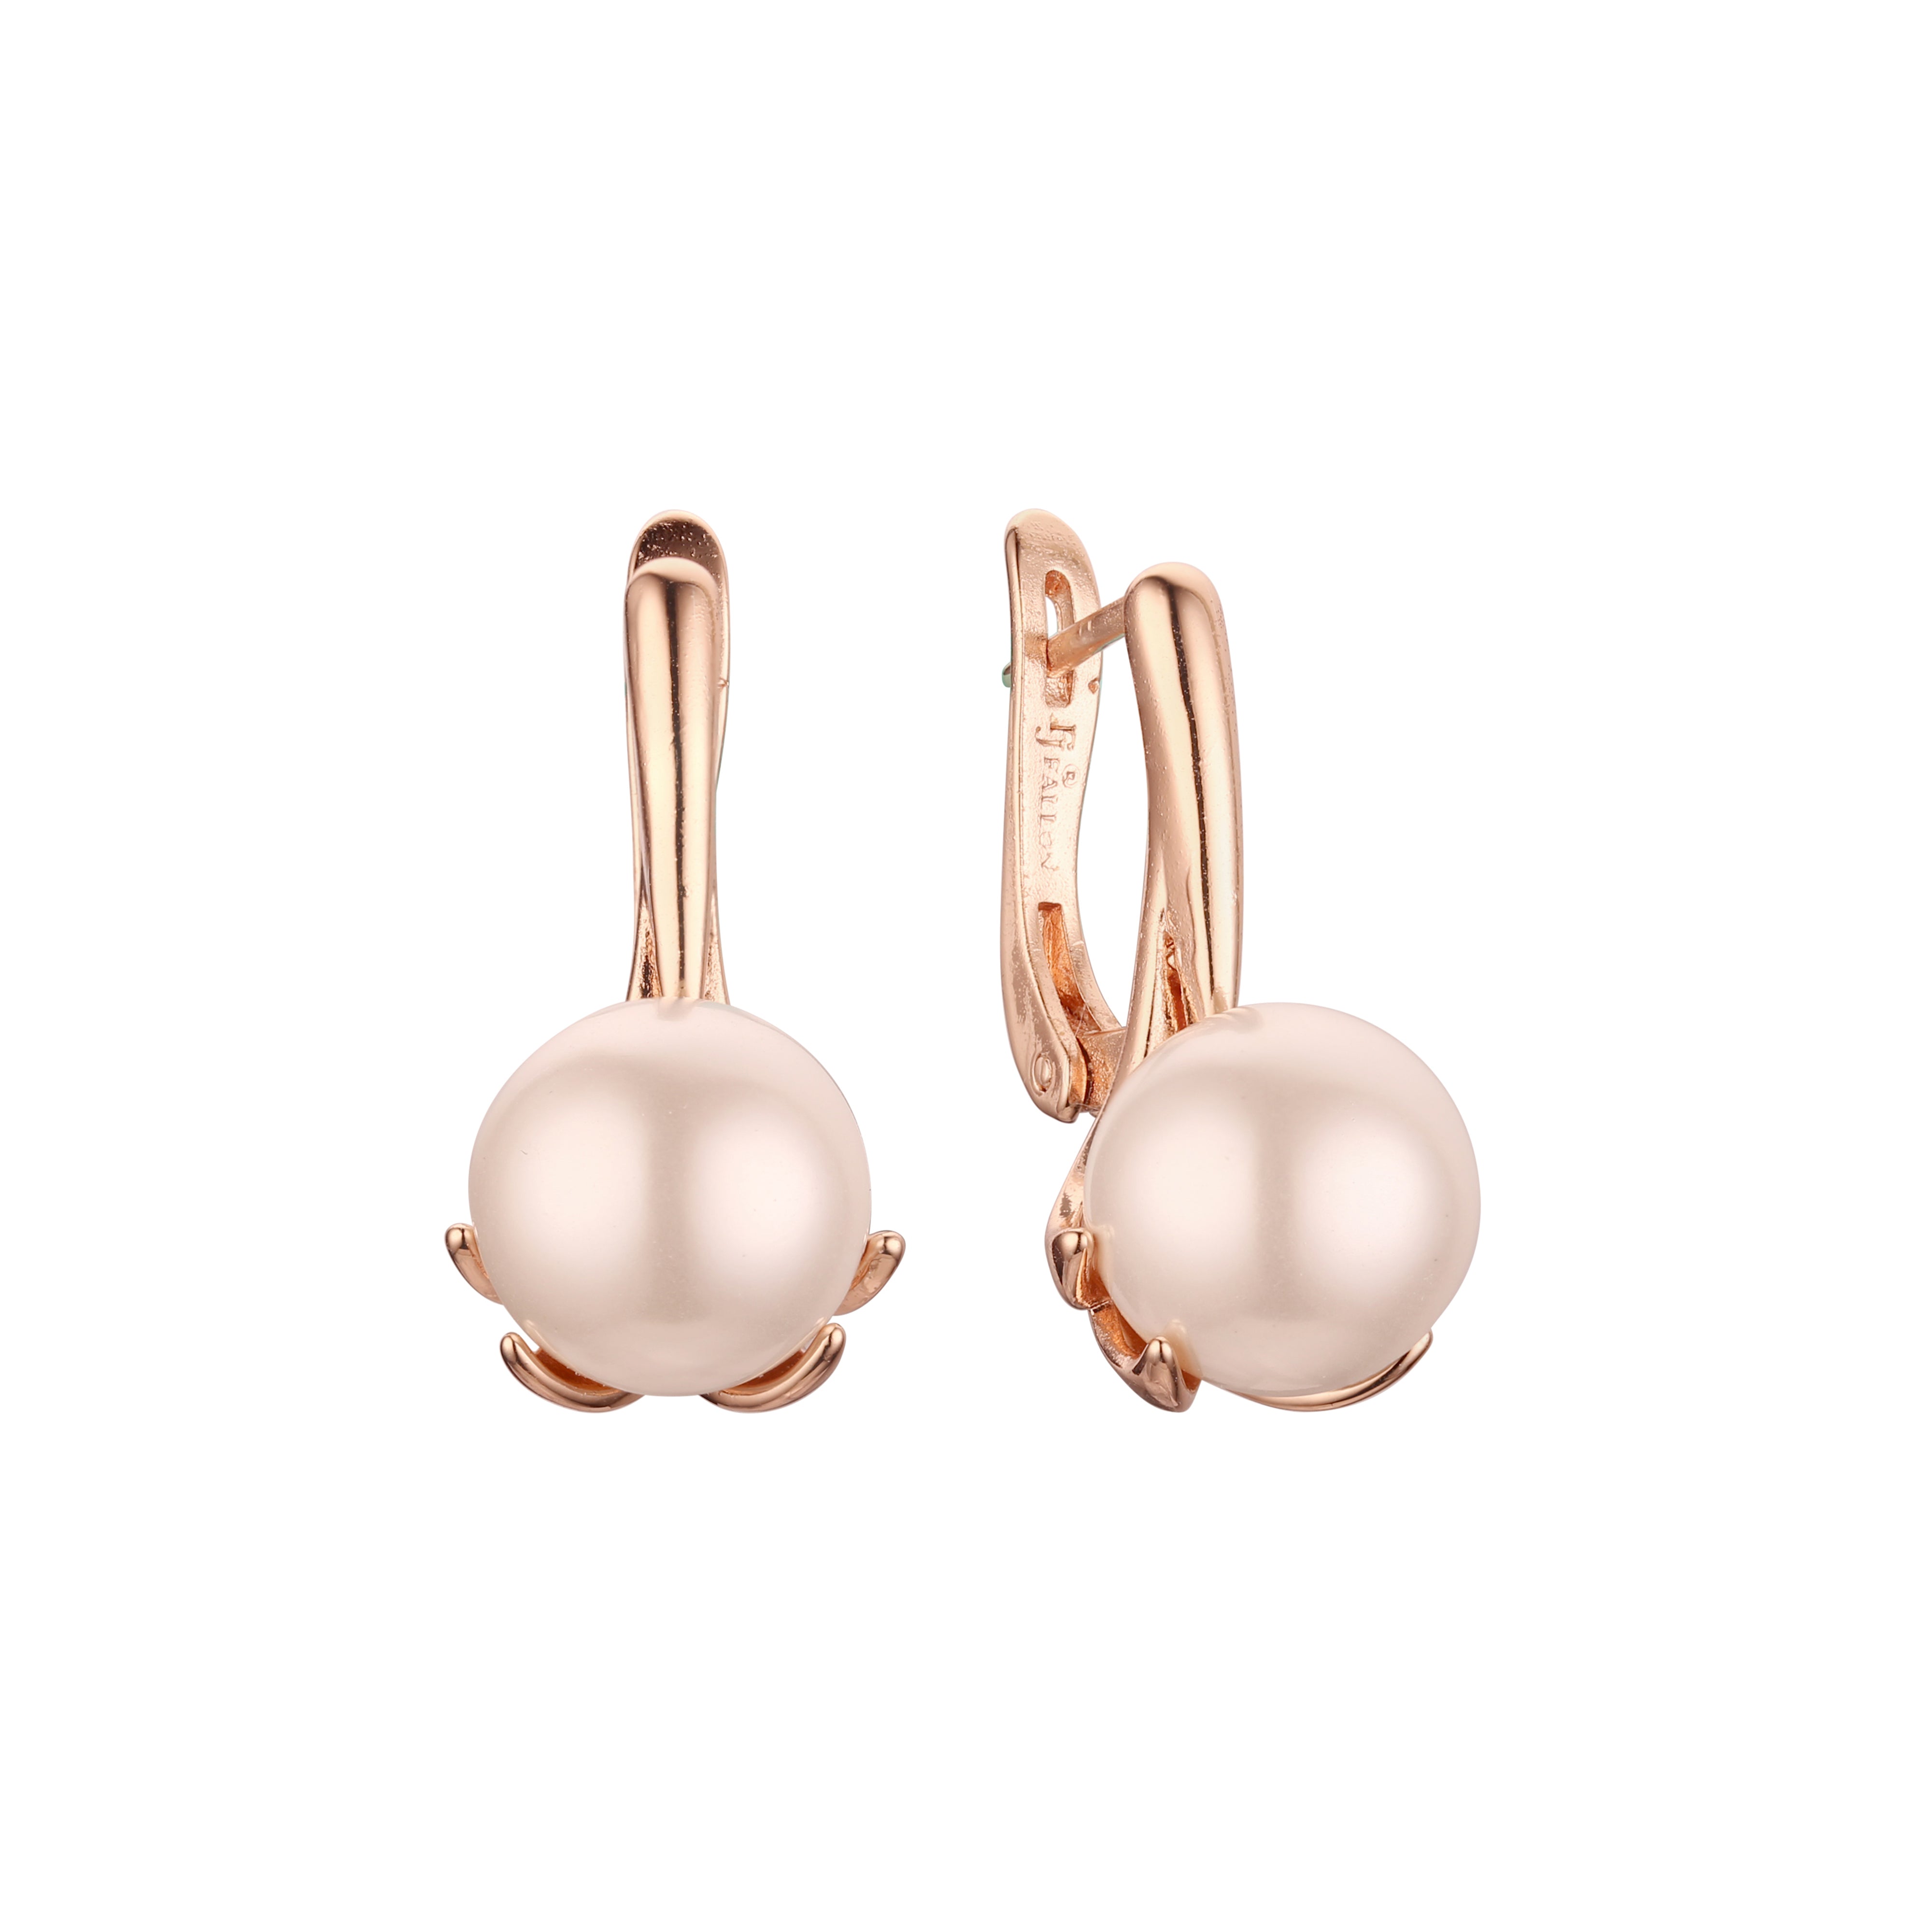 .Pearl earrings in 14K Gold, White Gold, Rose Gold plating colors